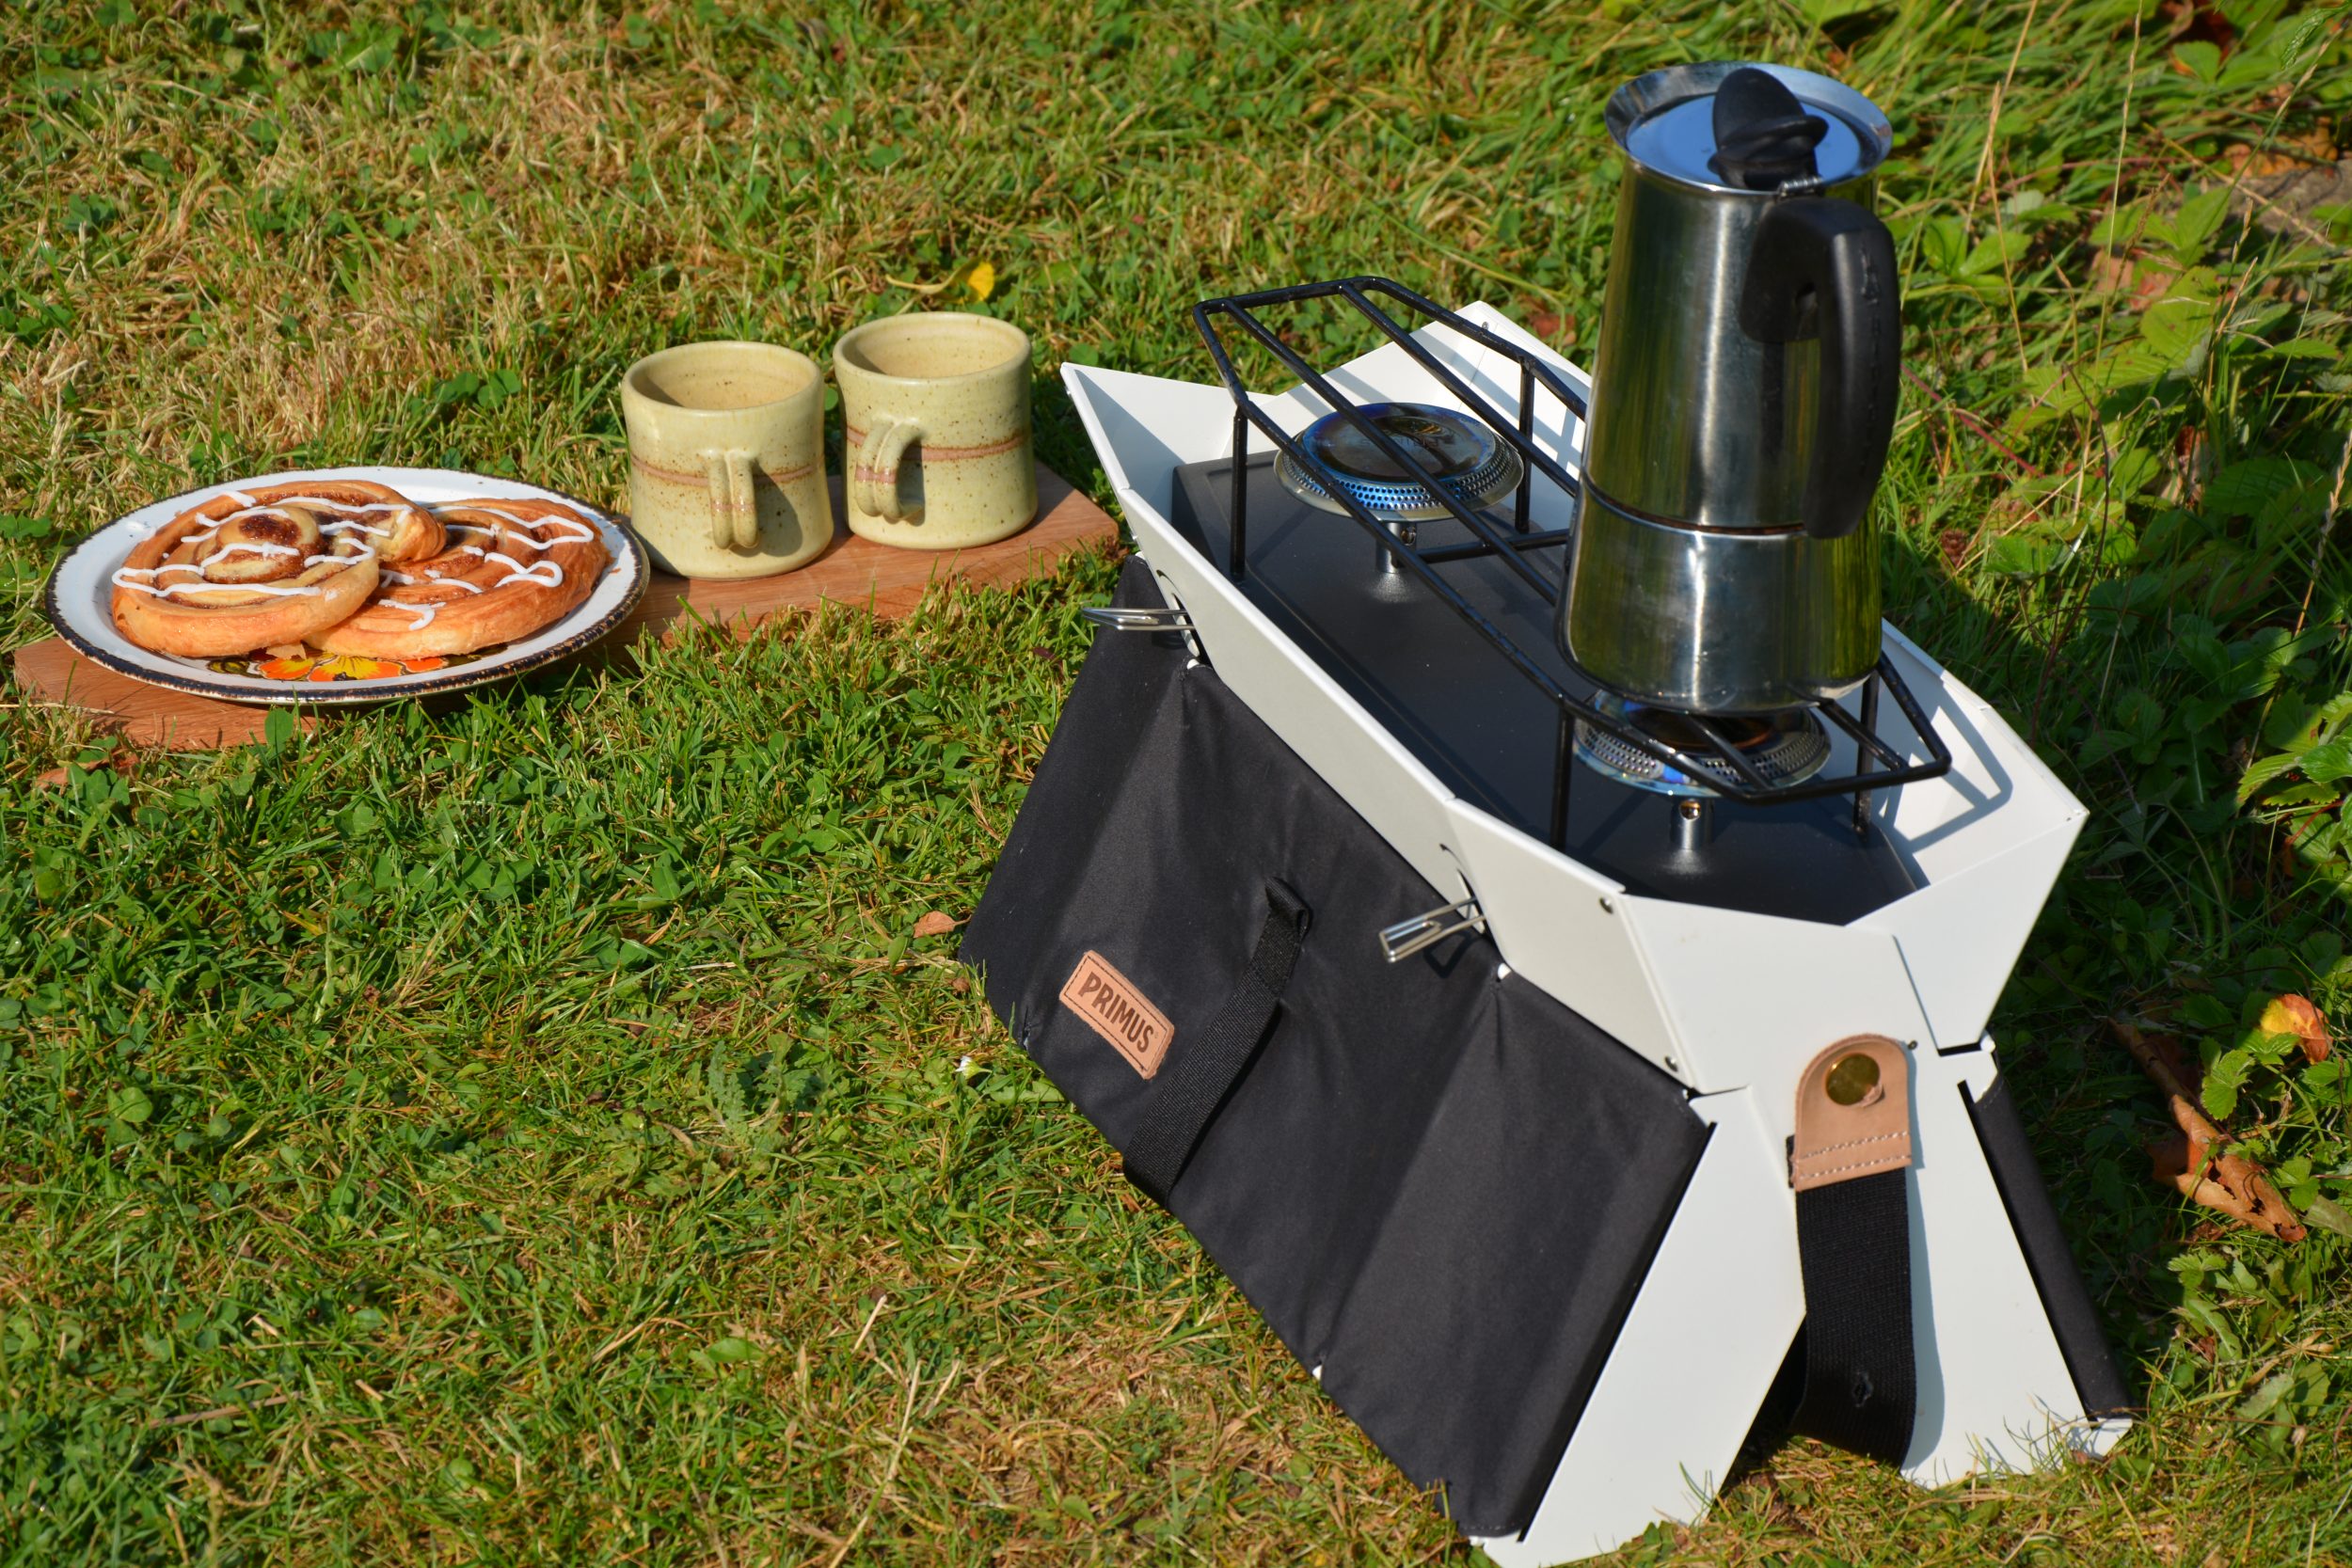 Using the Onja stove from Primus